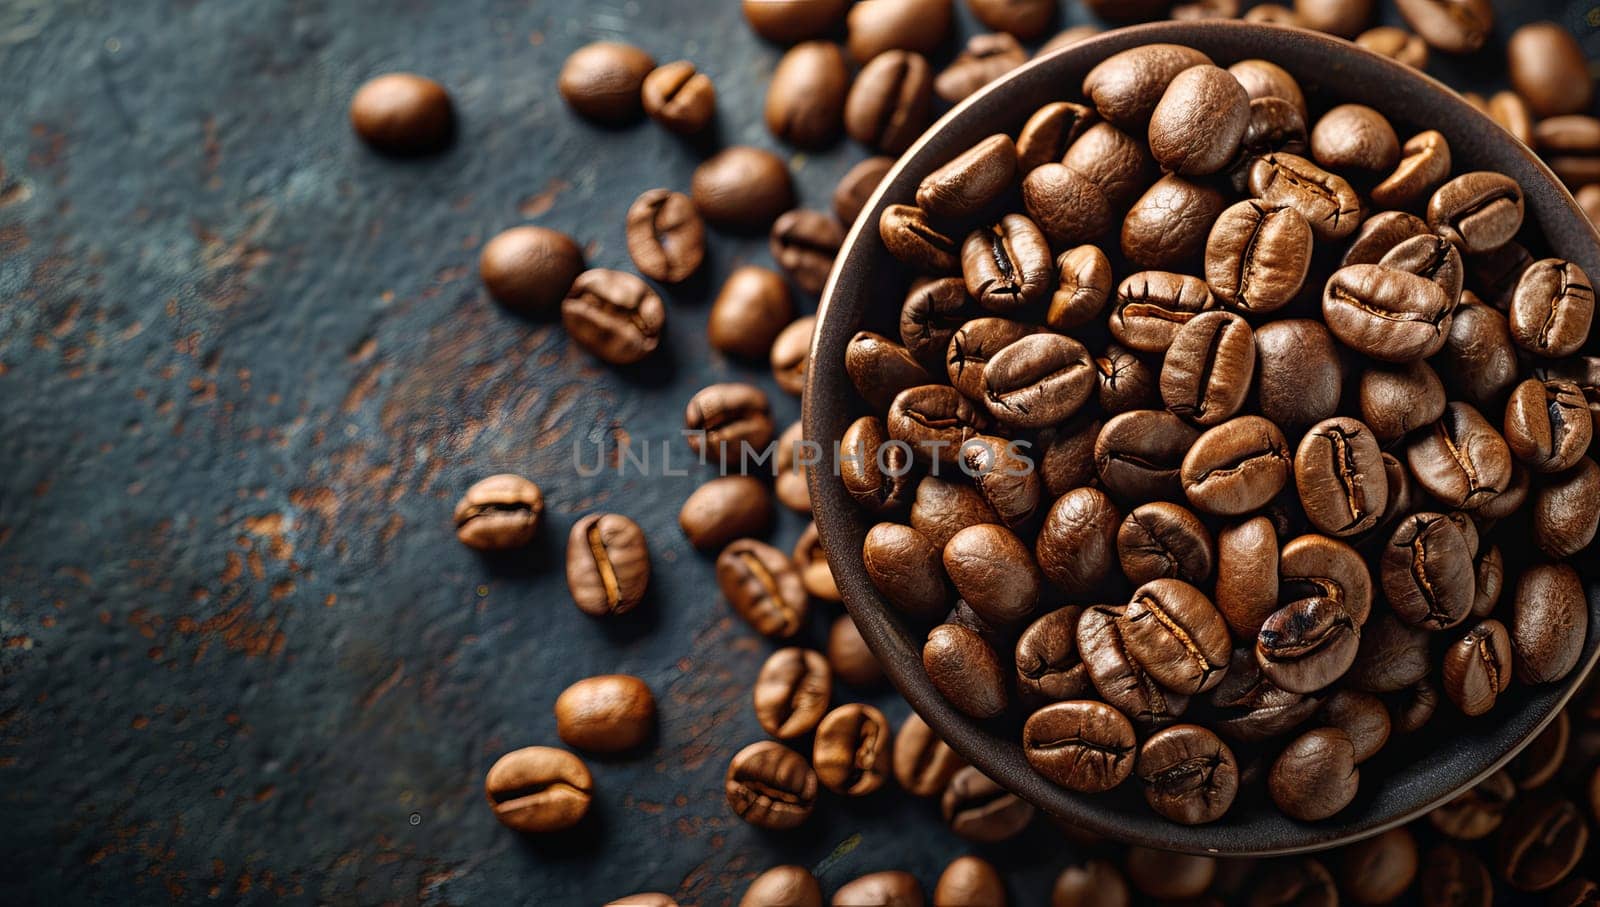 Aromatic coffee beans fill a rustic bowl